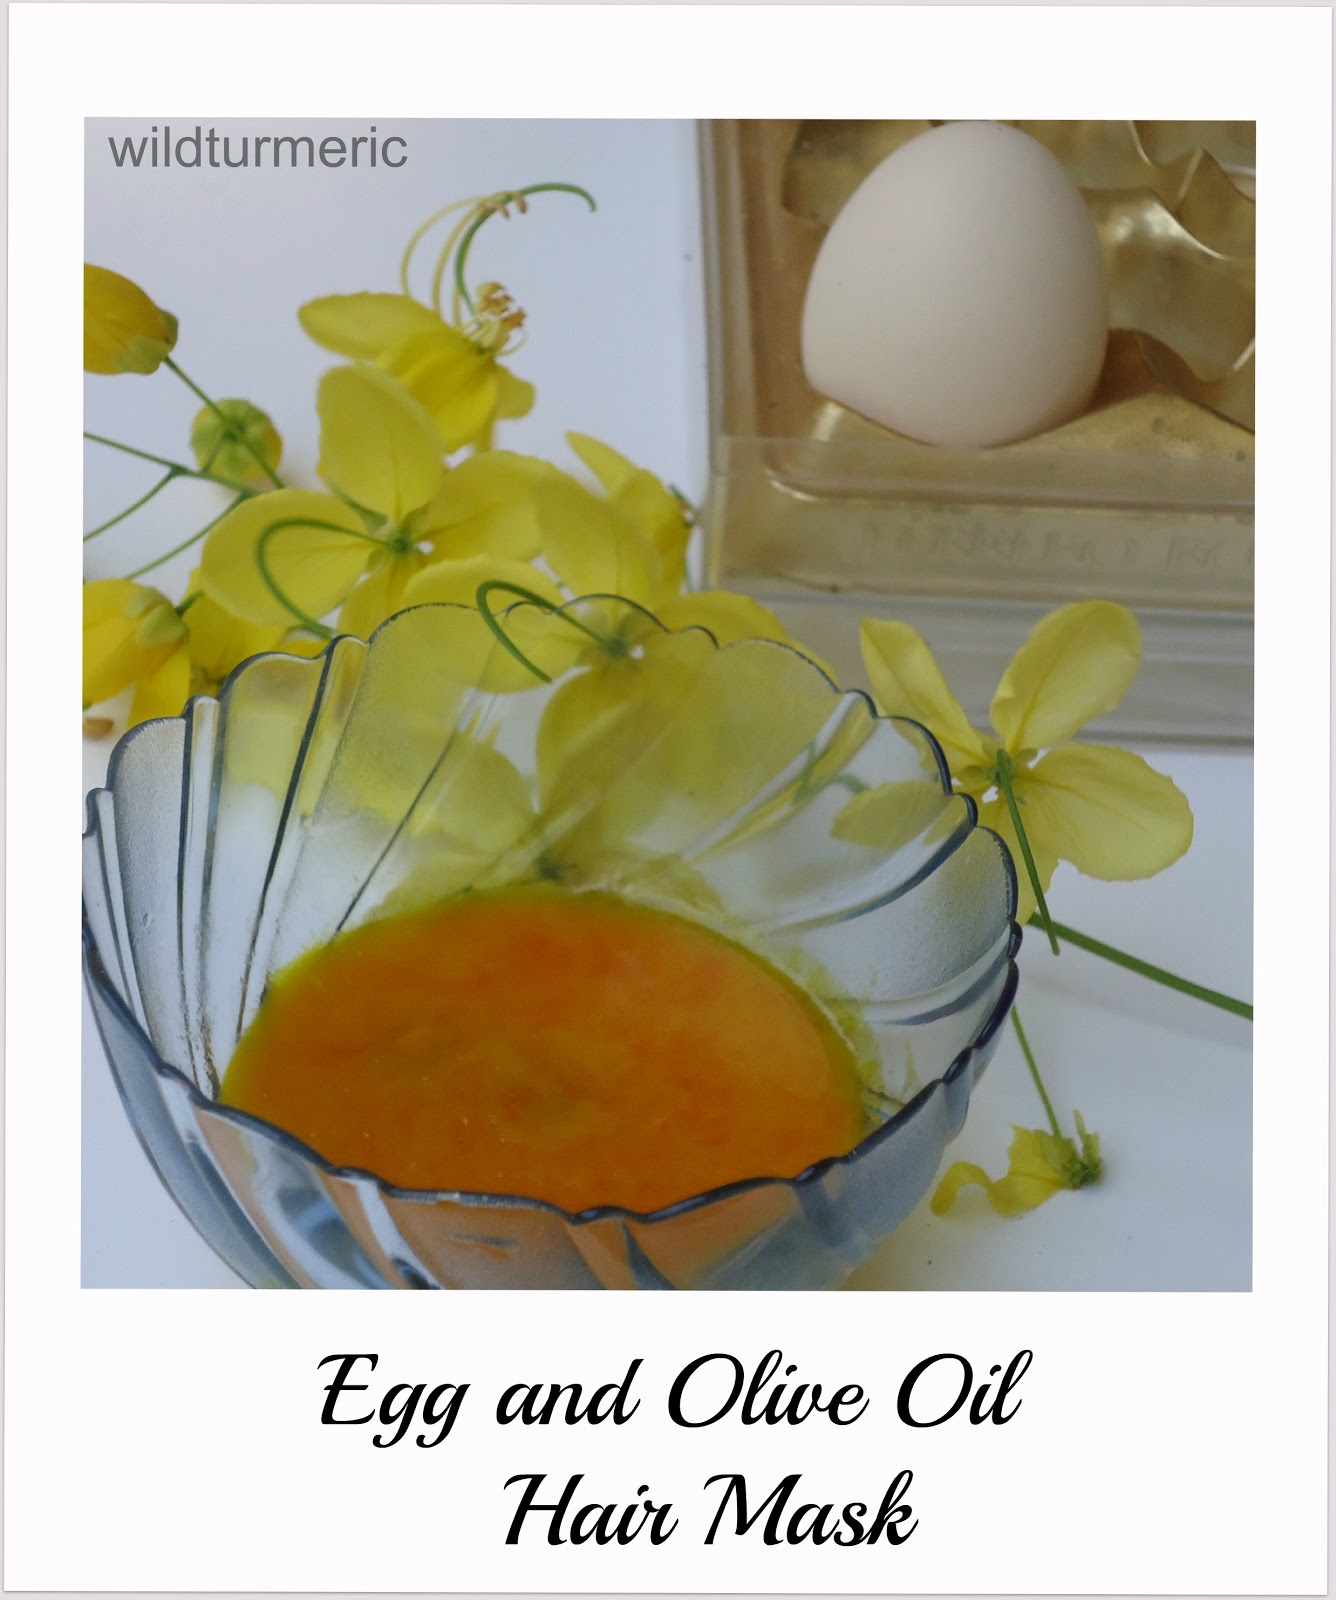 2 Simple Steps To Make Egg and Olive Oil Hair Mask For Hair Growth -  Wildturmeric